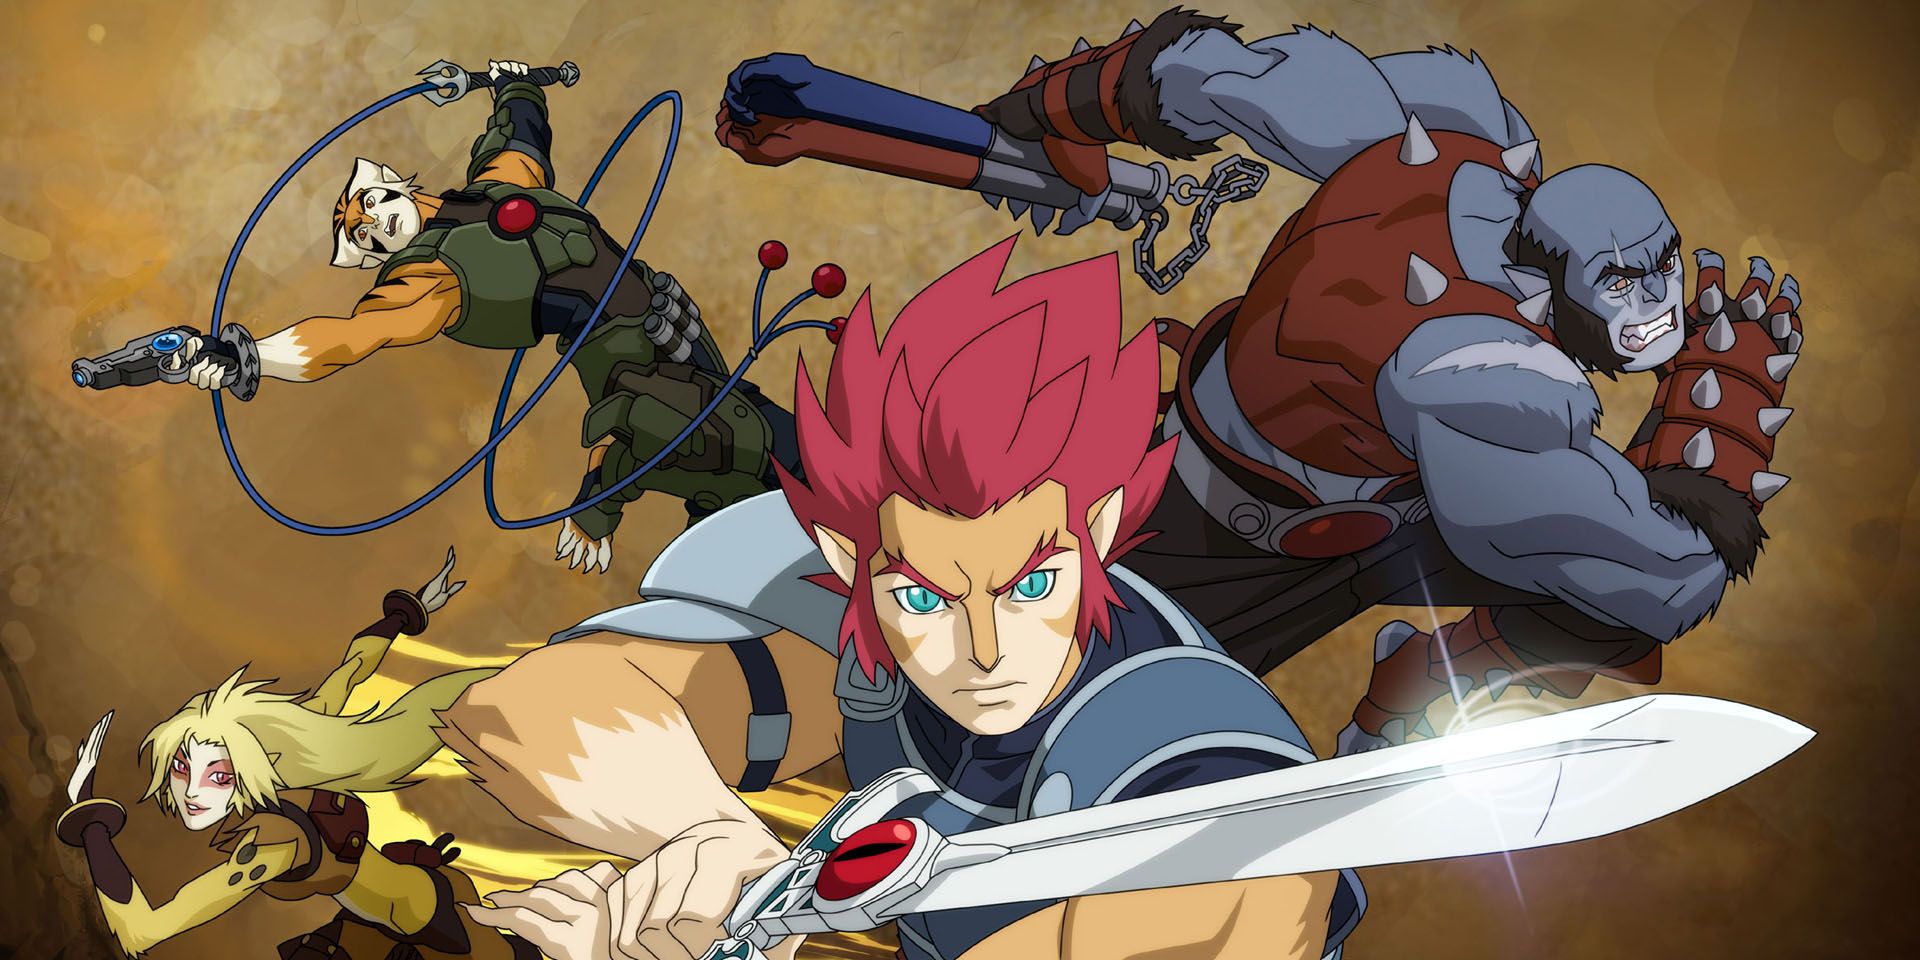 Image from the 2011 ThunderCats reboot.